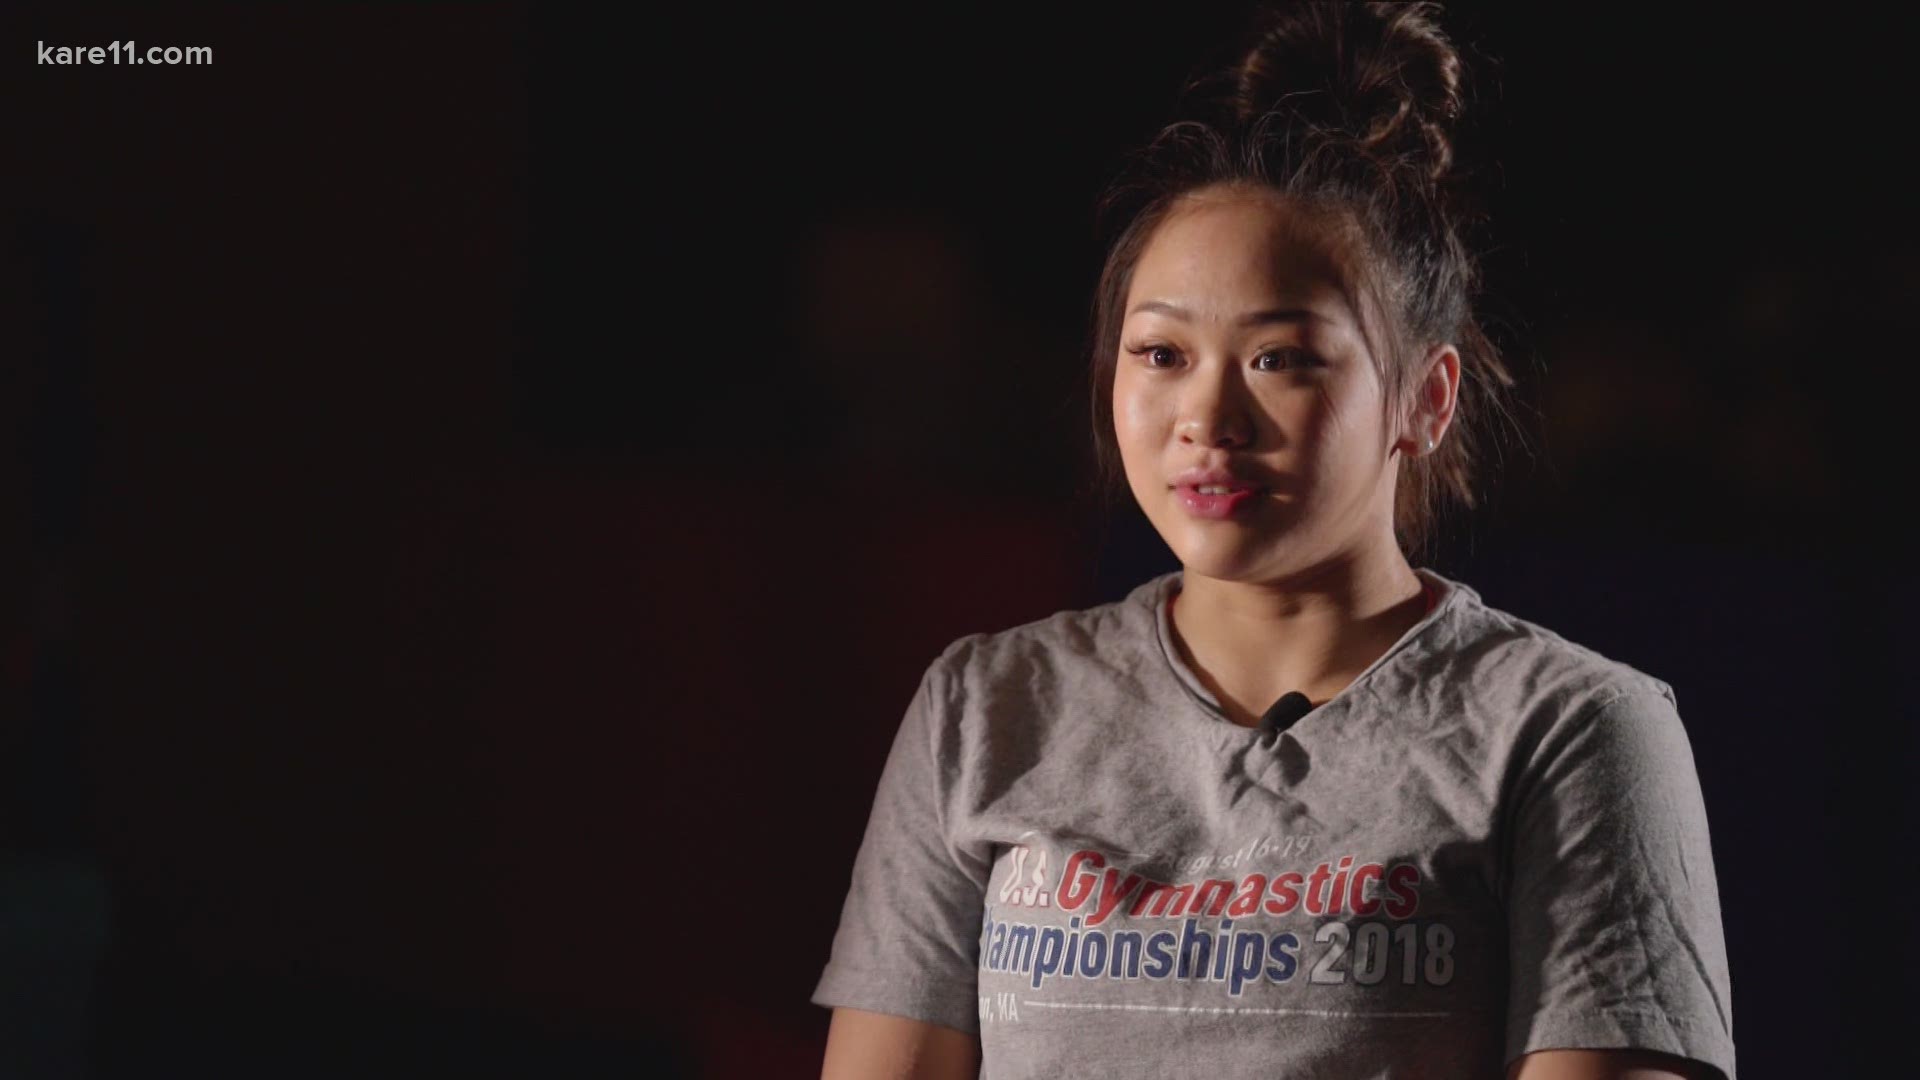 The 18-year-old Twin Cities gymnast finished second last weekend at the U.S. Championships.